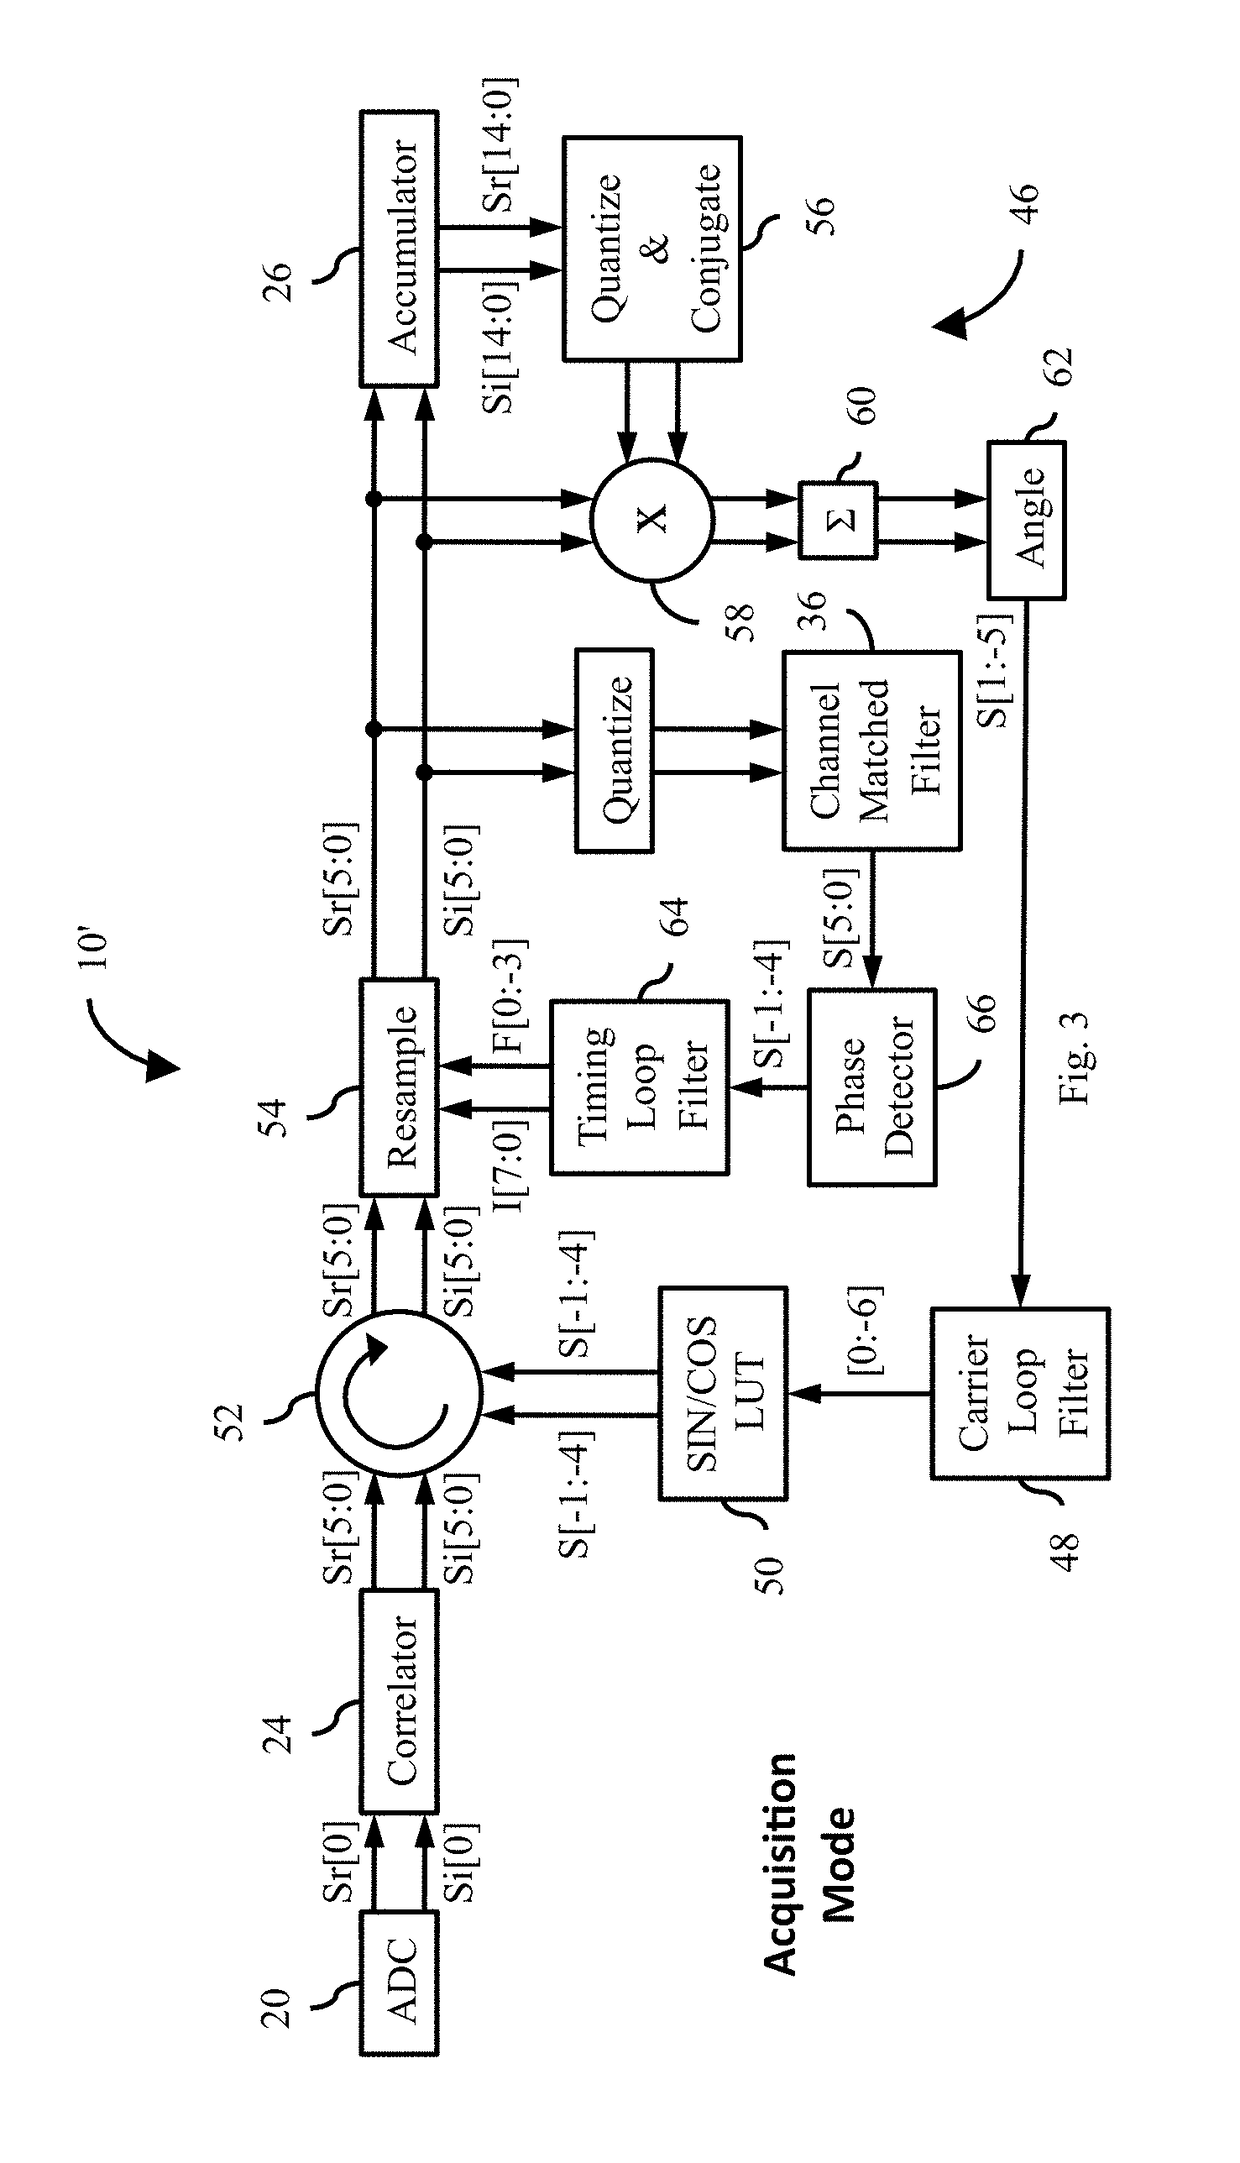 Measuring angle of incidence in an ultrawideband communication system